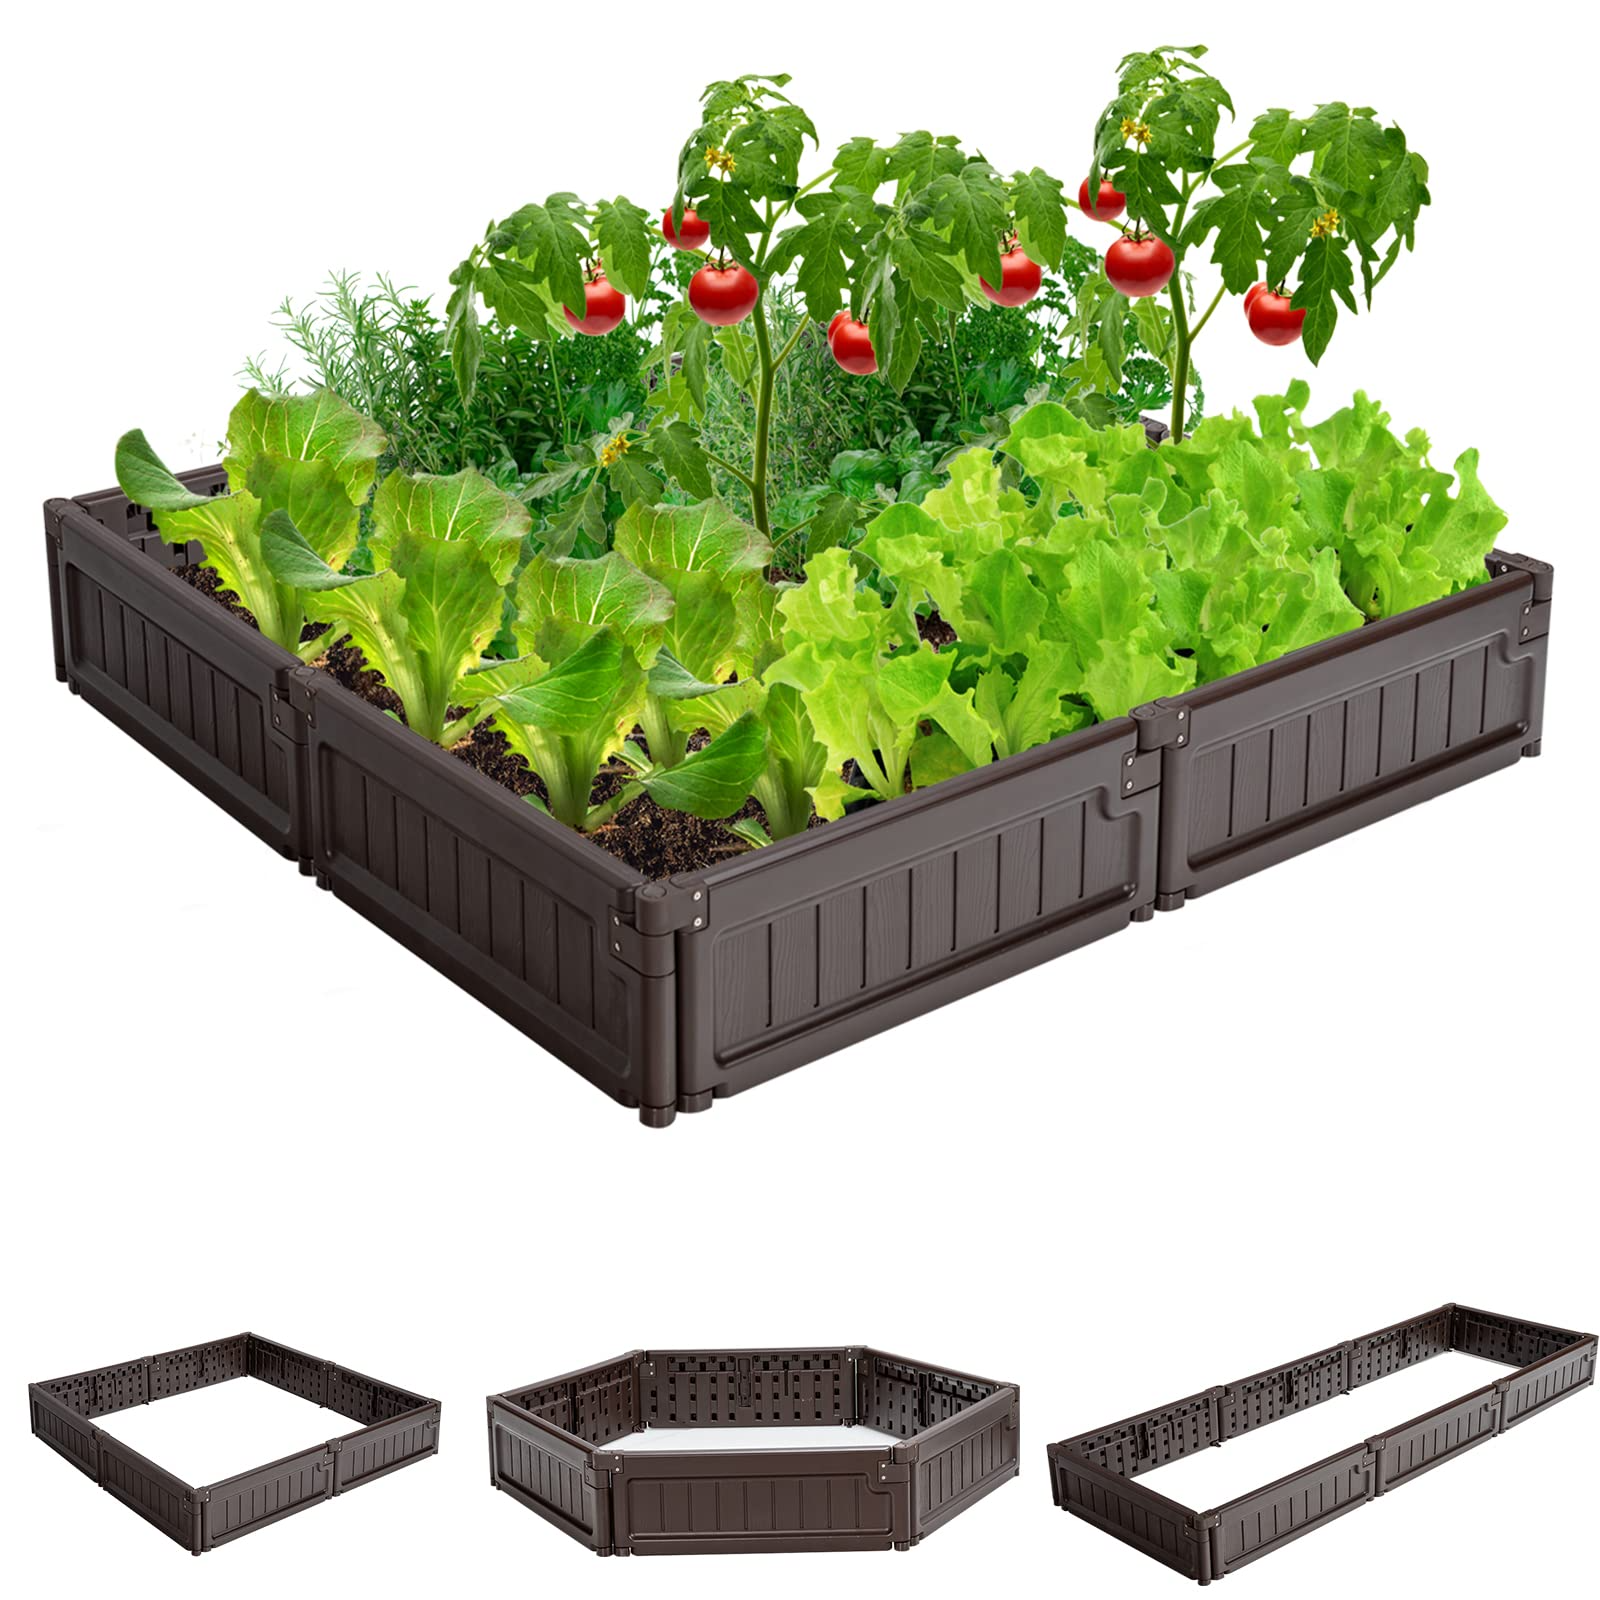 4x4 Ft Planter Raised Bed, Octagon Garden Bed for Vegetable Flower Succulents Fruits